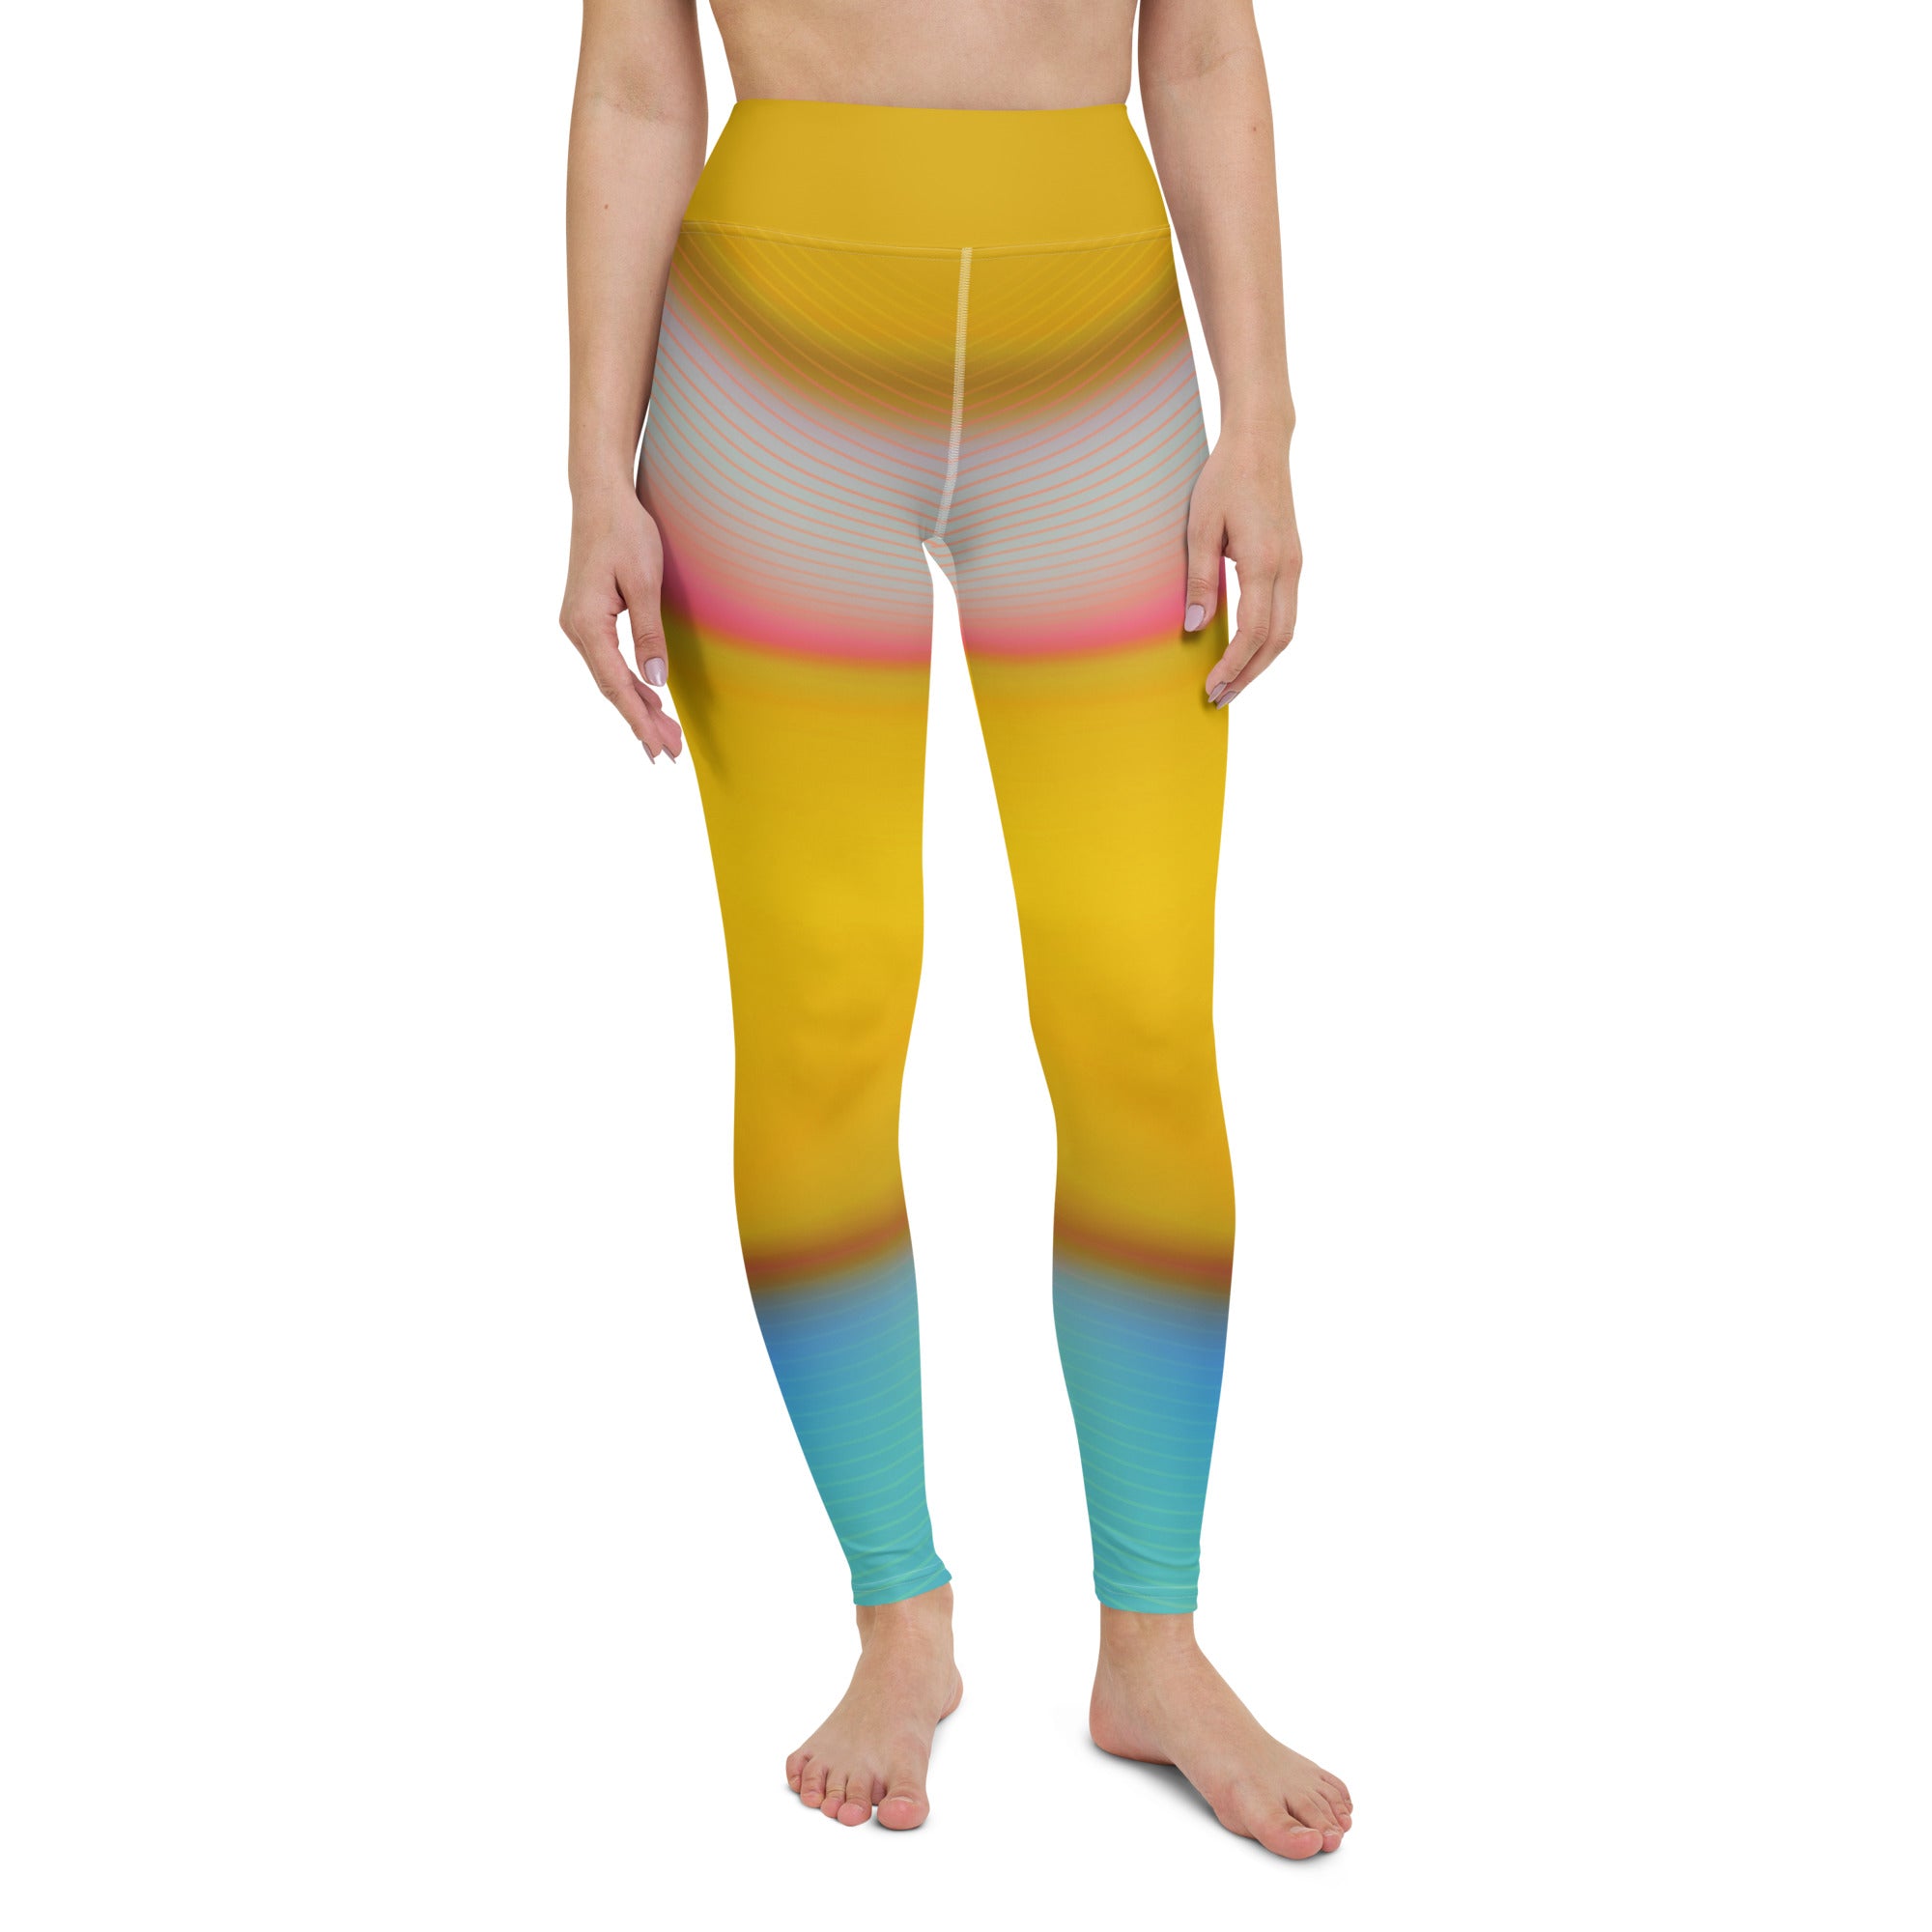 Outdoor yoga session made vibrant by wearing Harmony Wave Gradient Leggings.